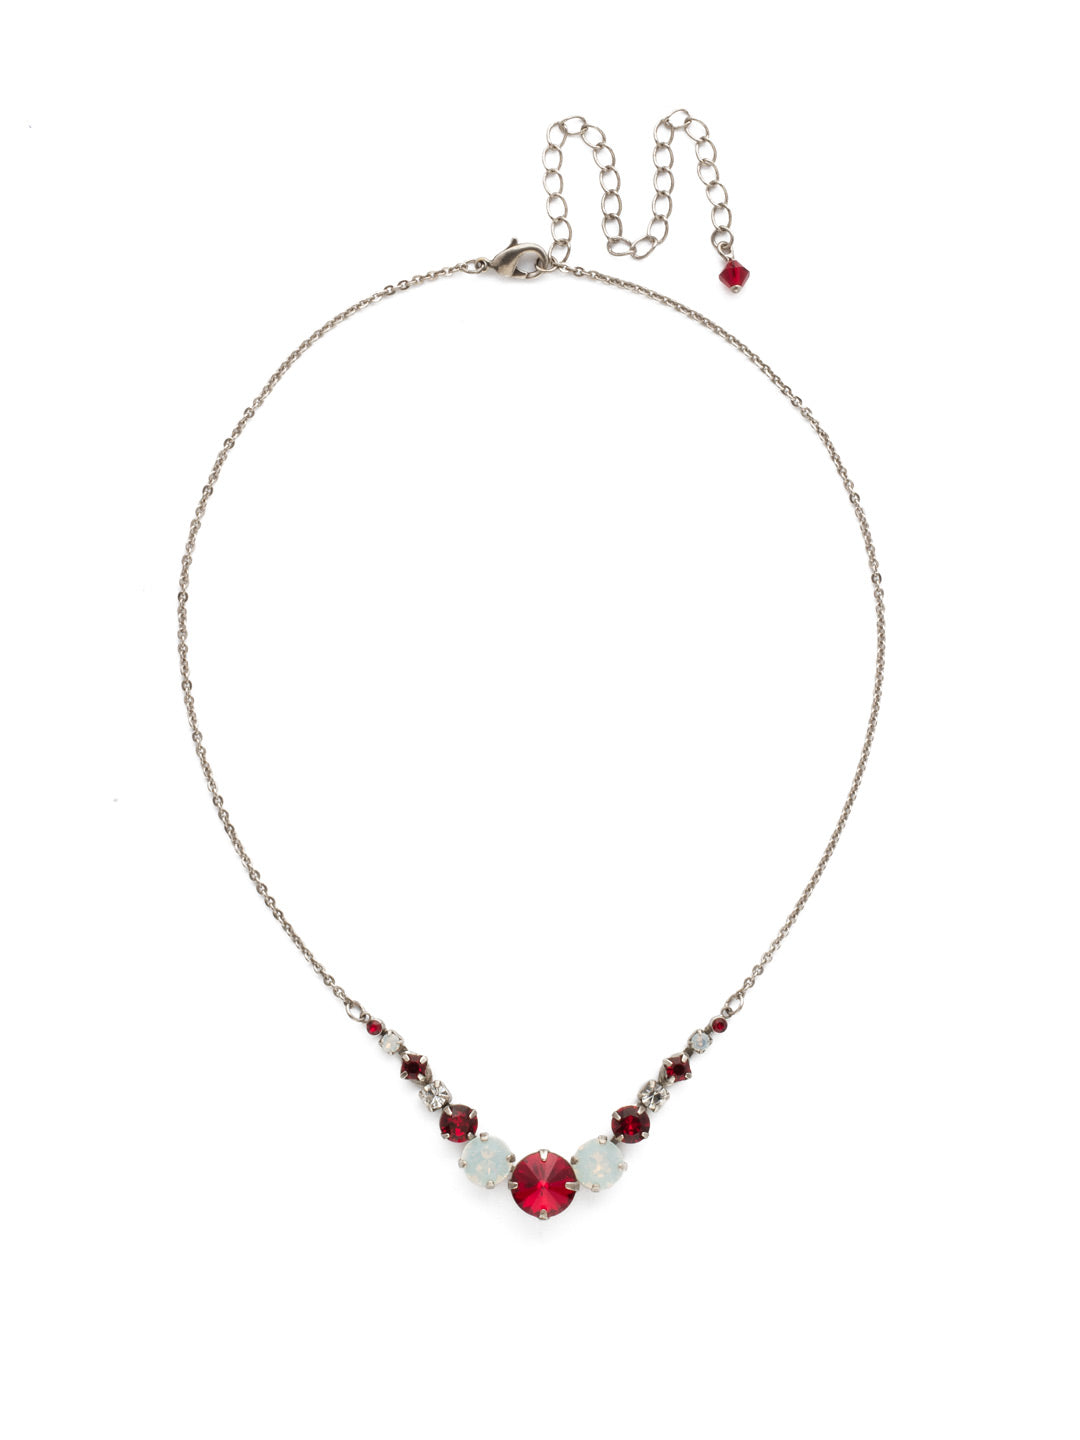 London Tennis Necklace - NCQ14ASCP - <p>A long, simple chain paired with gorgeous round stones is exactly what every girl needs to dress things up. This round stone necklace is perfect for layering, or to just wear alone. Let the simple sparkle take over. From Sorrelli's Crimson Pride collection in our Antique Silver-tone finish.</p>